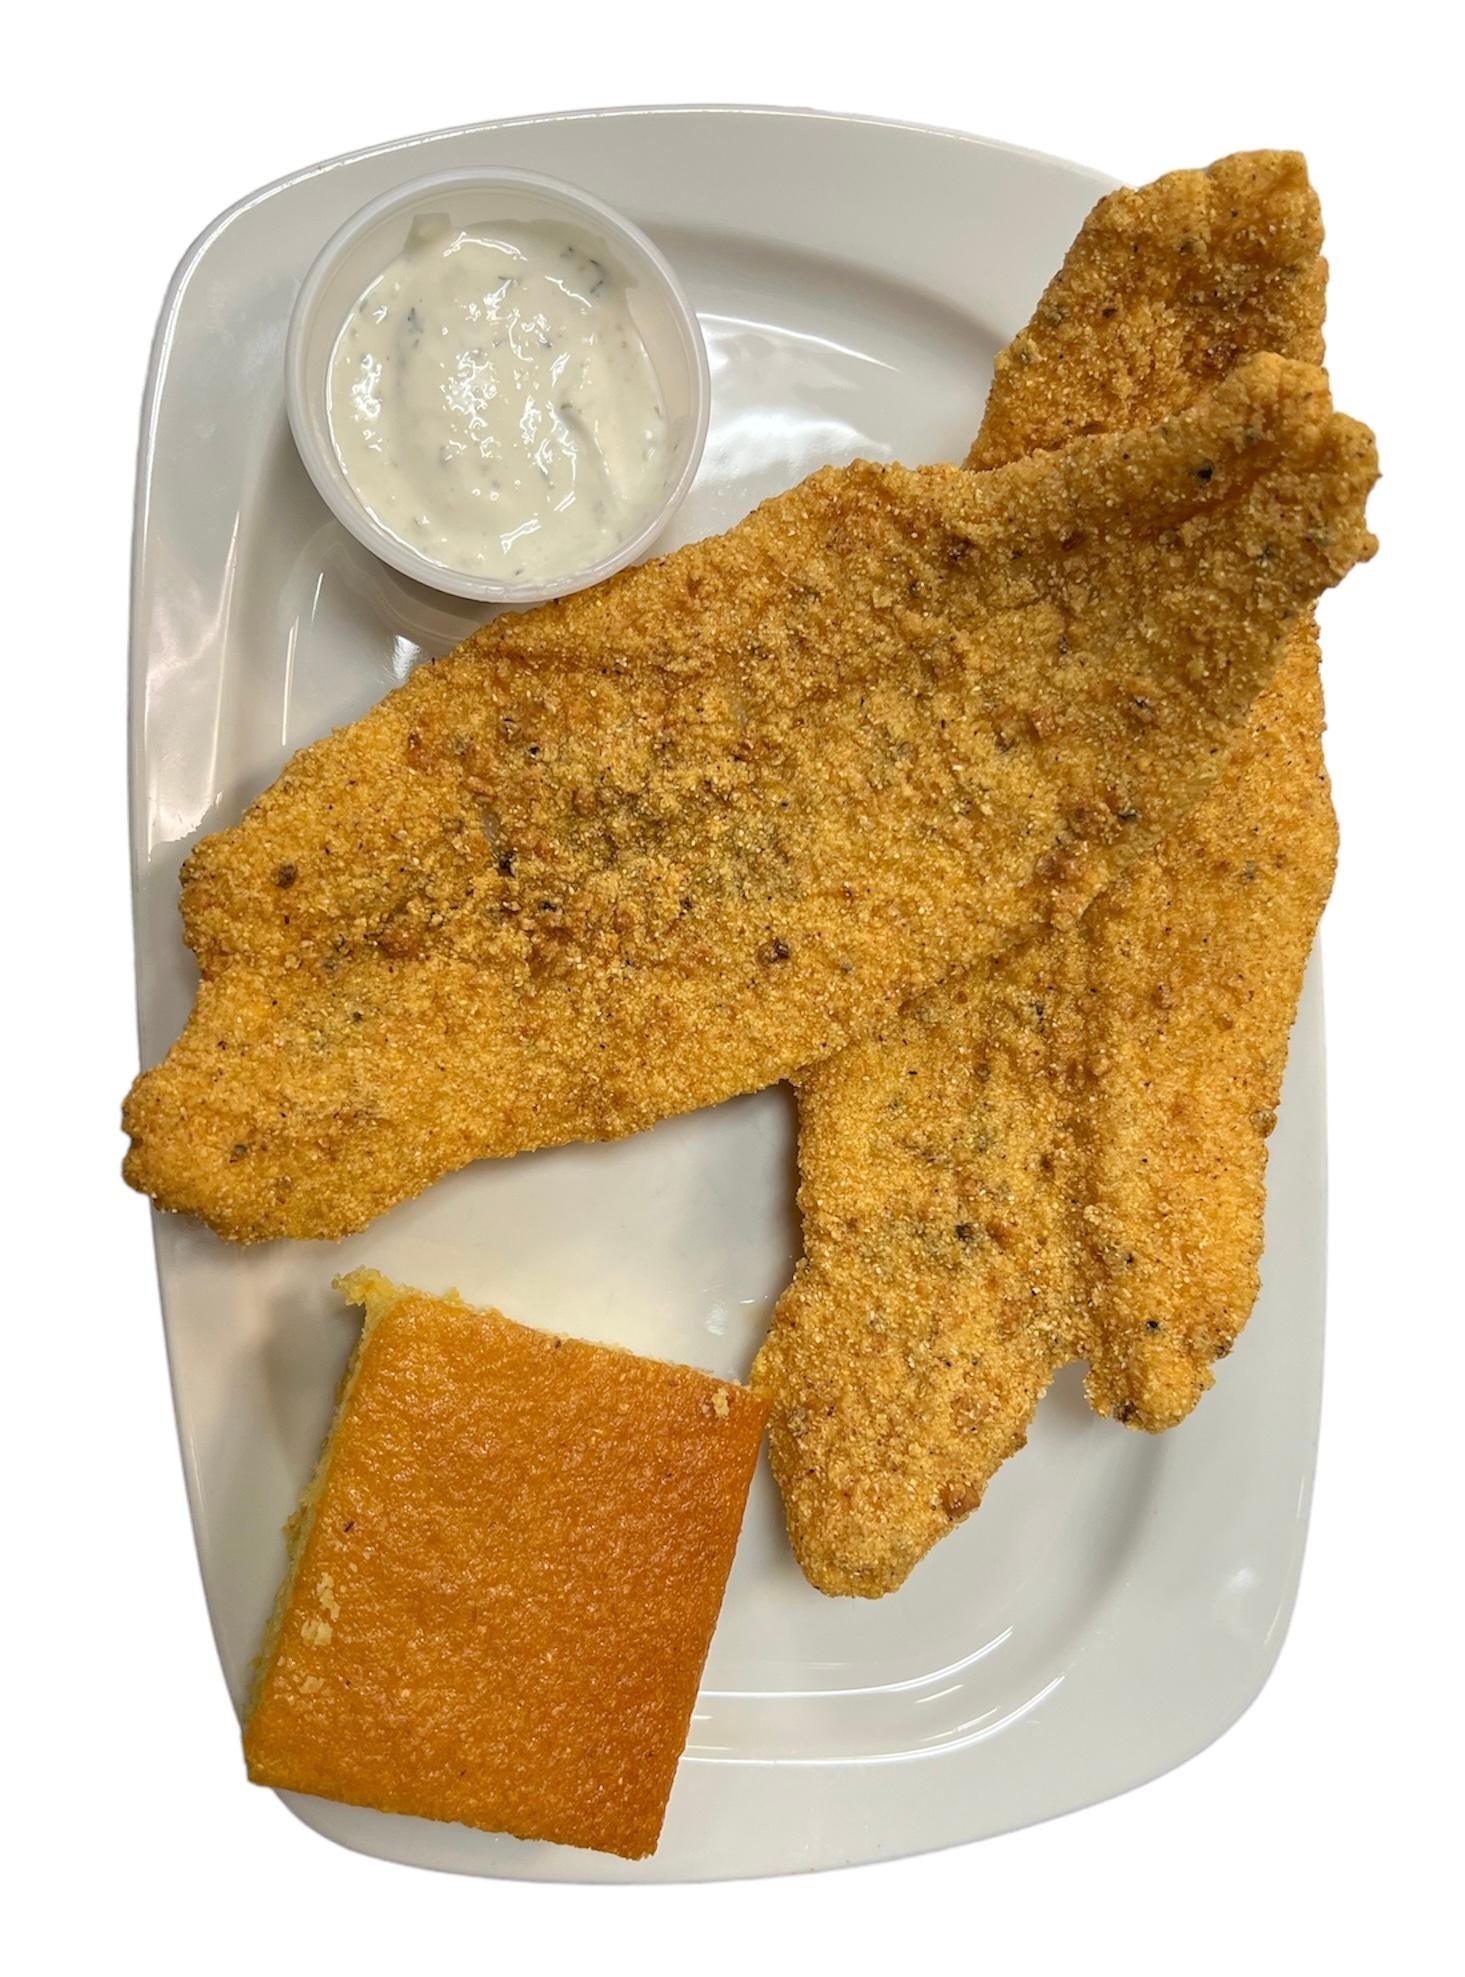 FRIED WHITING FISH FILLET